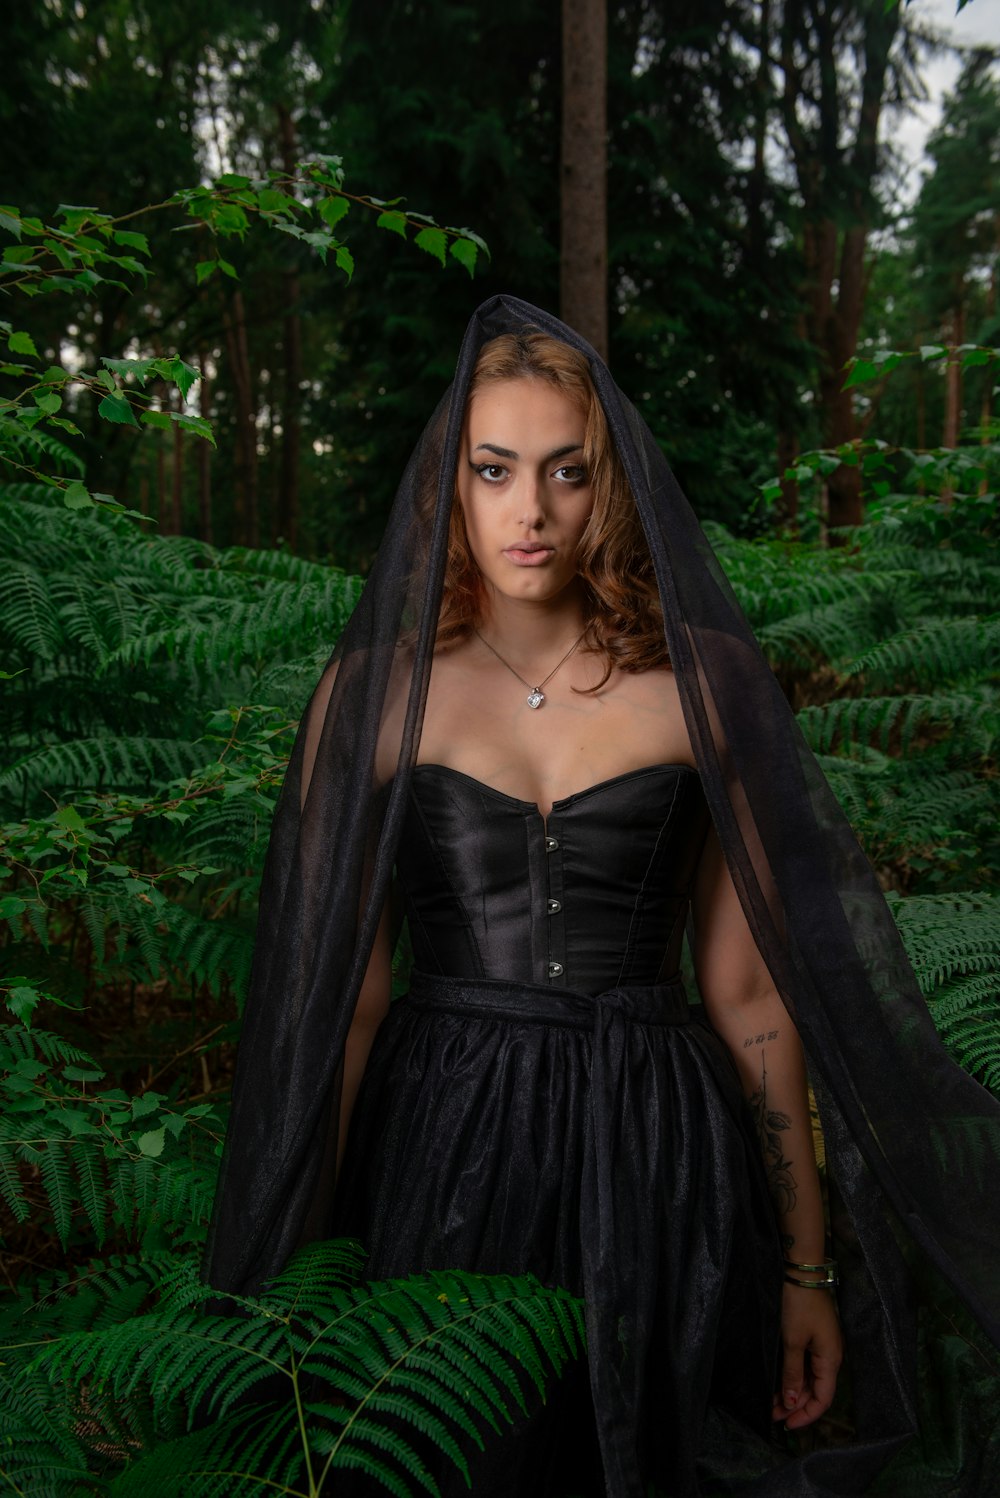 a woman wearing a black corset and veil in a forest